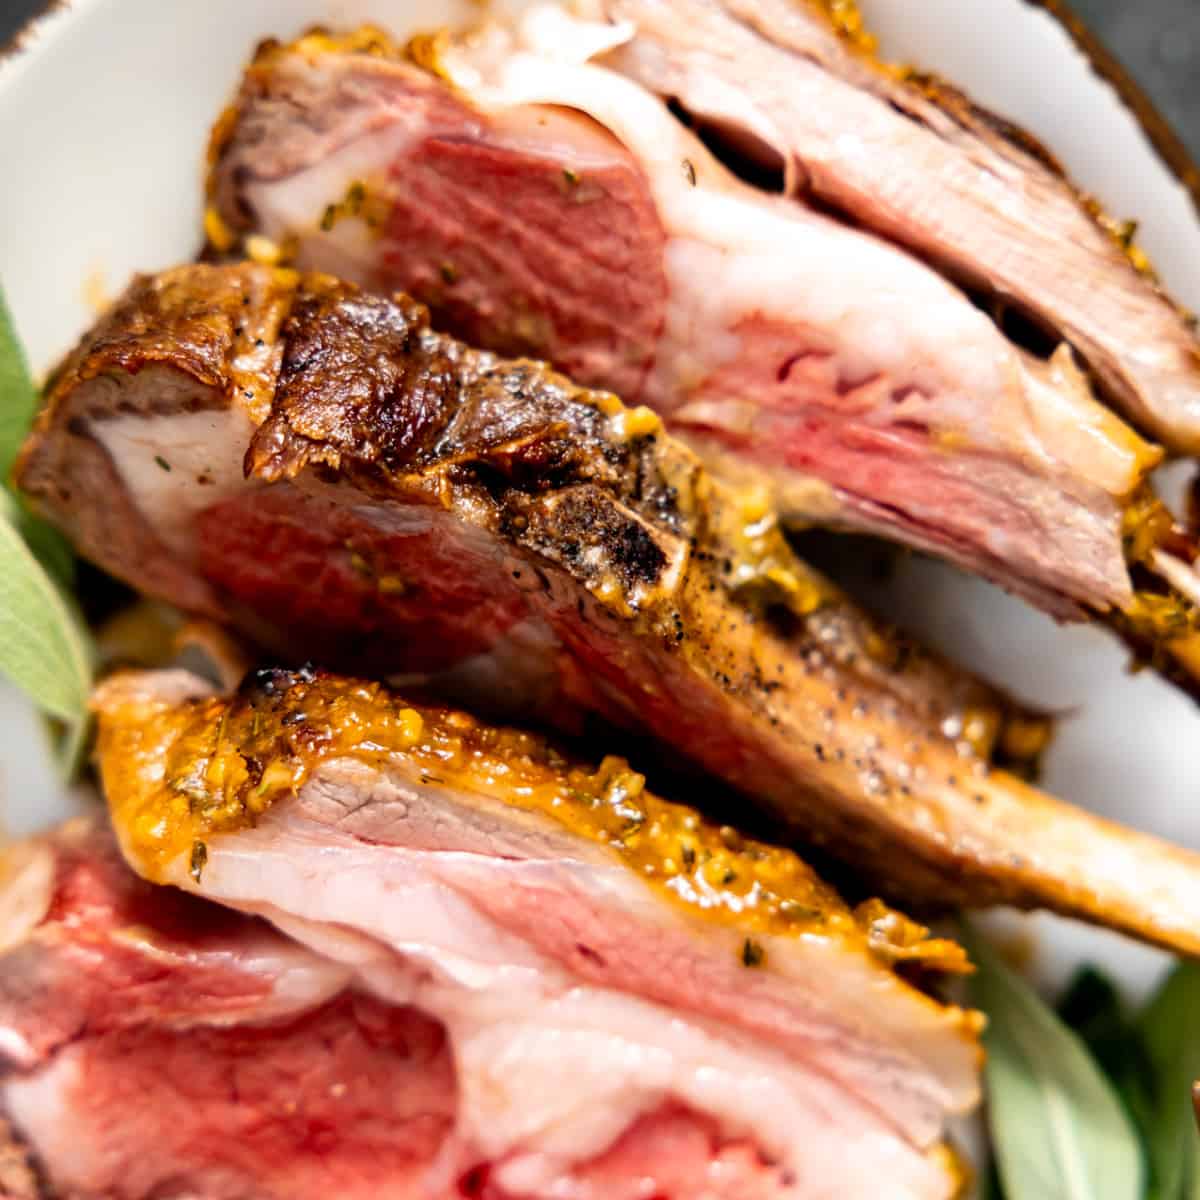 Sliced rack of lamb on a plate.